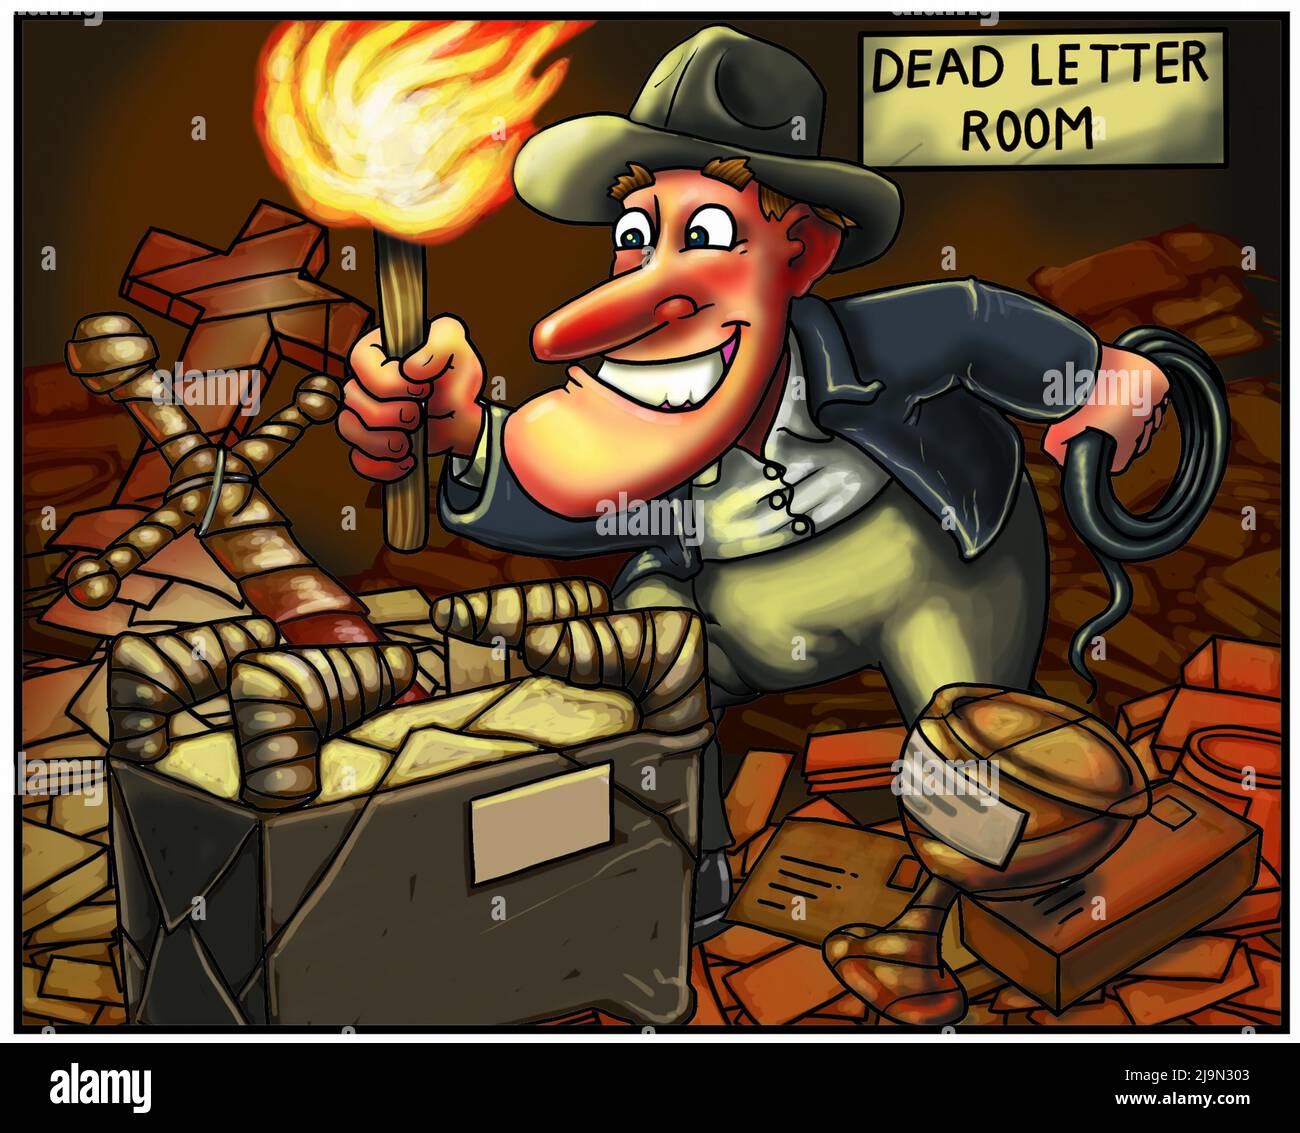 Indiana Jones style funny art man exploring a dead letter room dead letter office for hidden treasures Art philately collecting hobbies postal service. Stock Photo